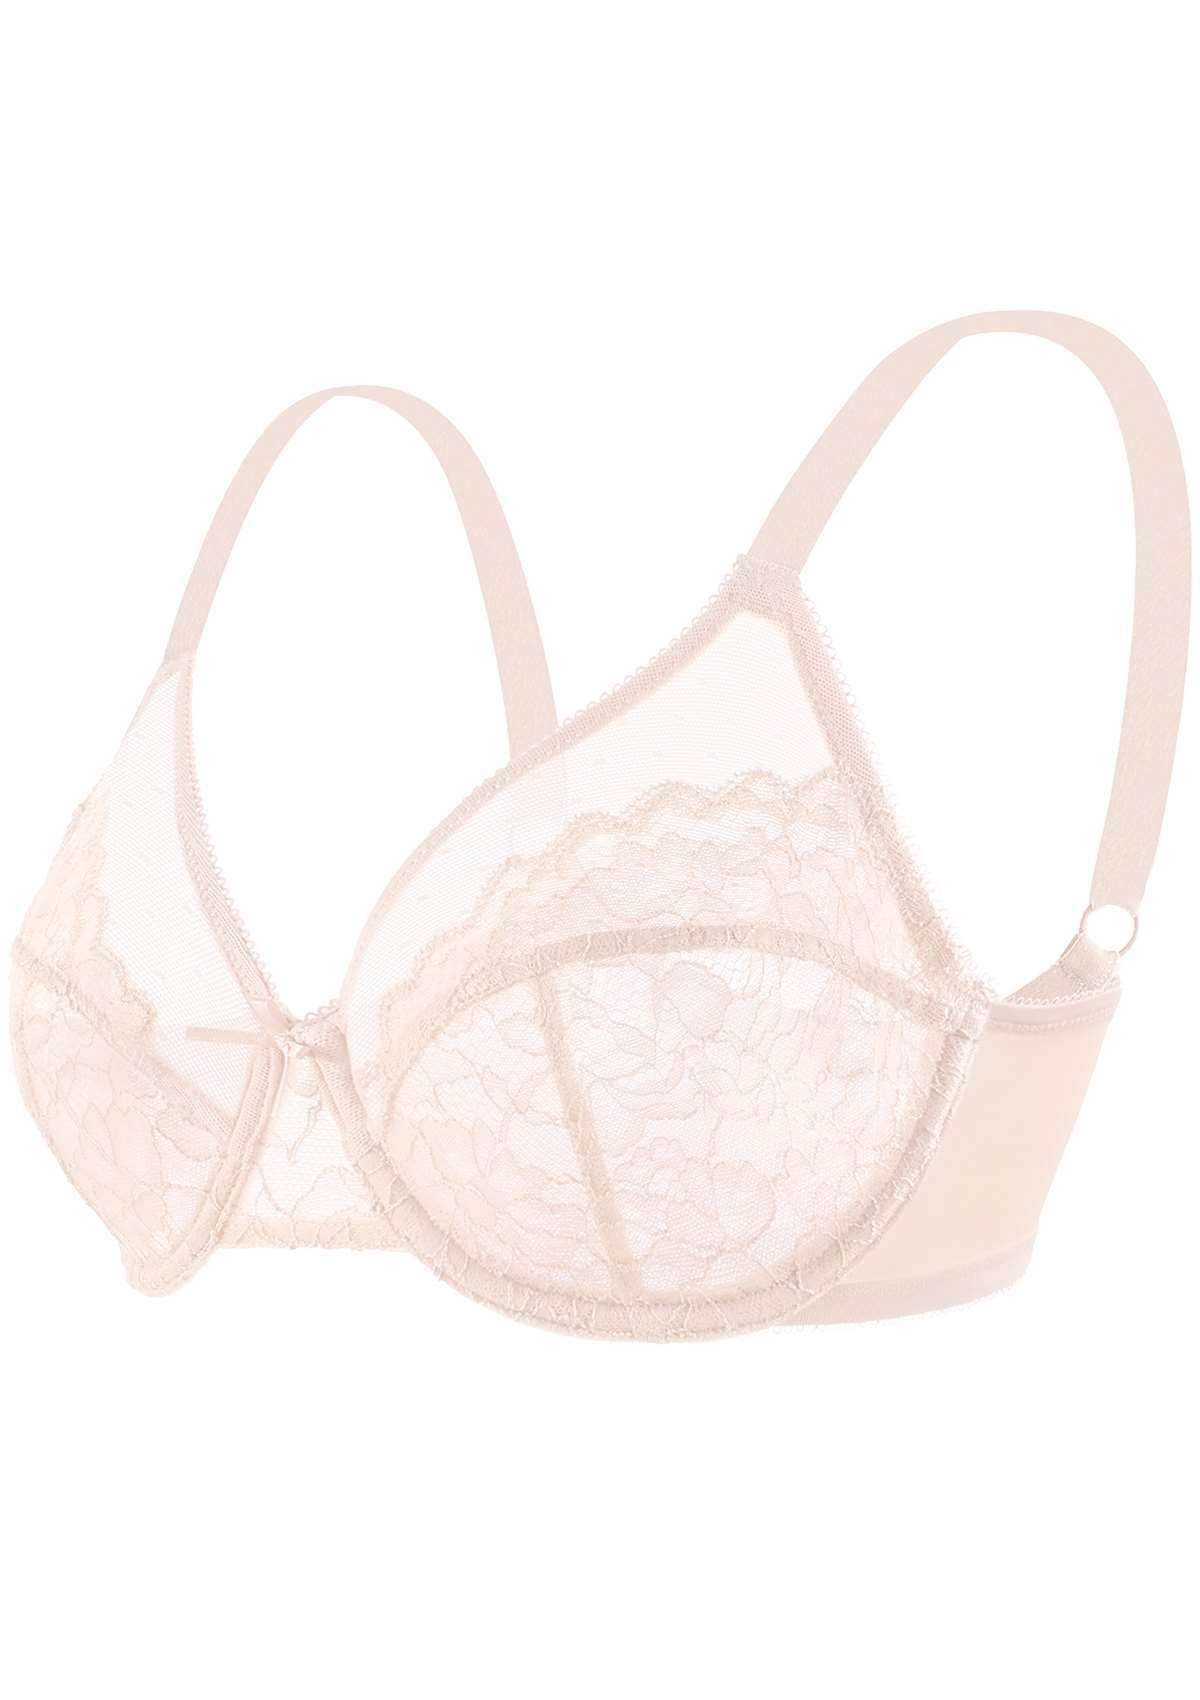 HSIA Enchante Lacy Bra: Comfy Sheer Lace Bra With Lift - Dusty Peach / 34 / C